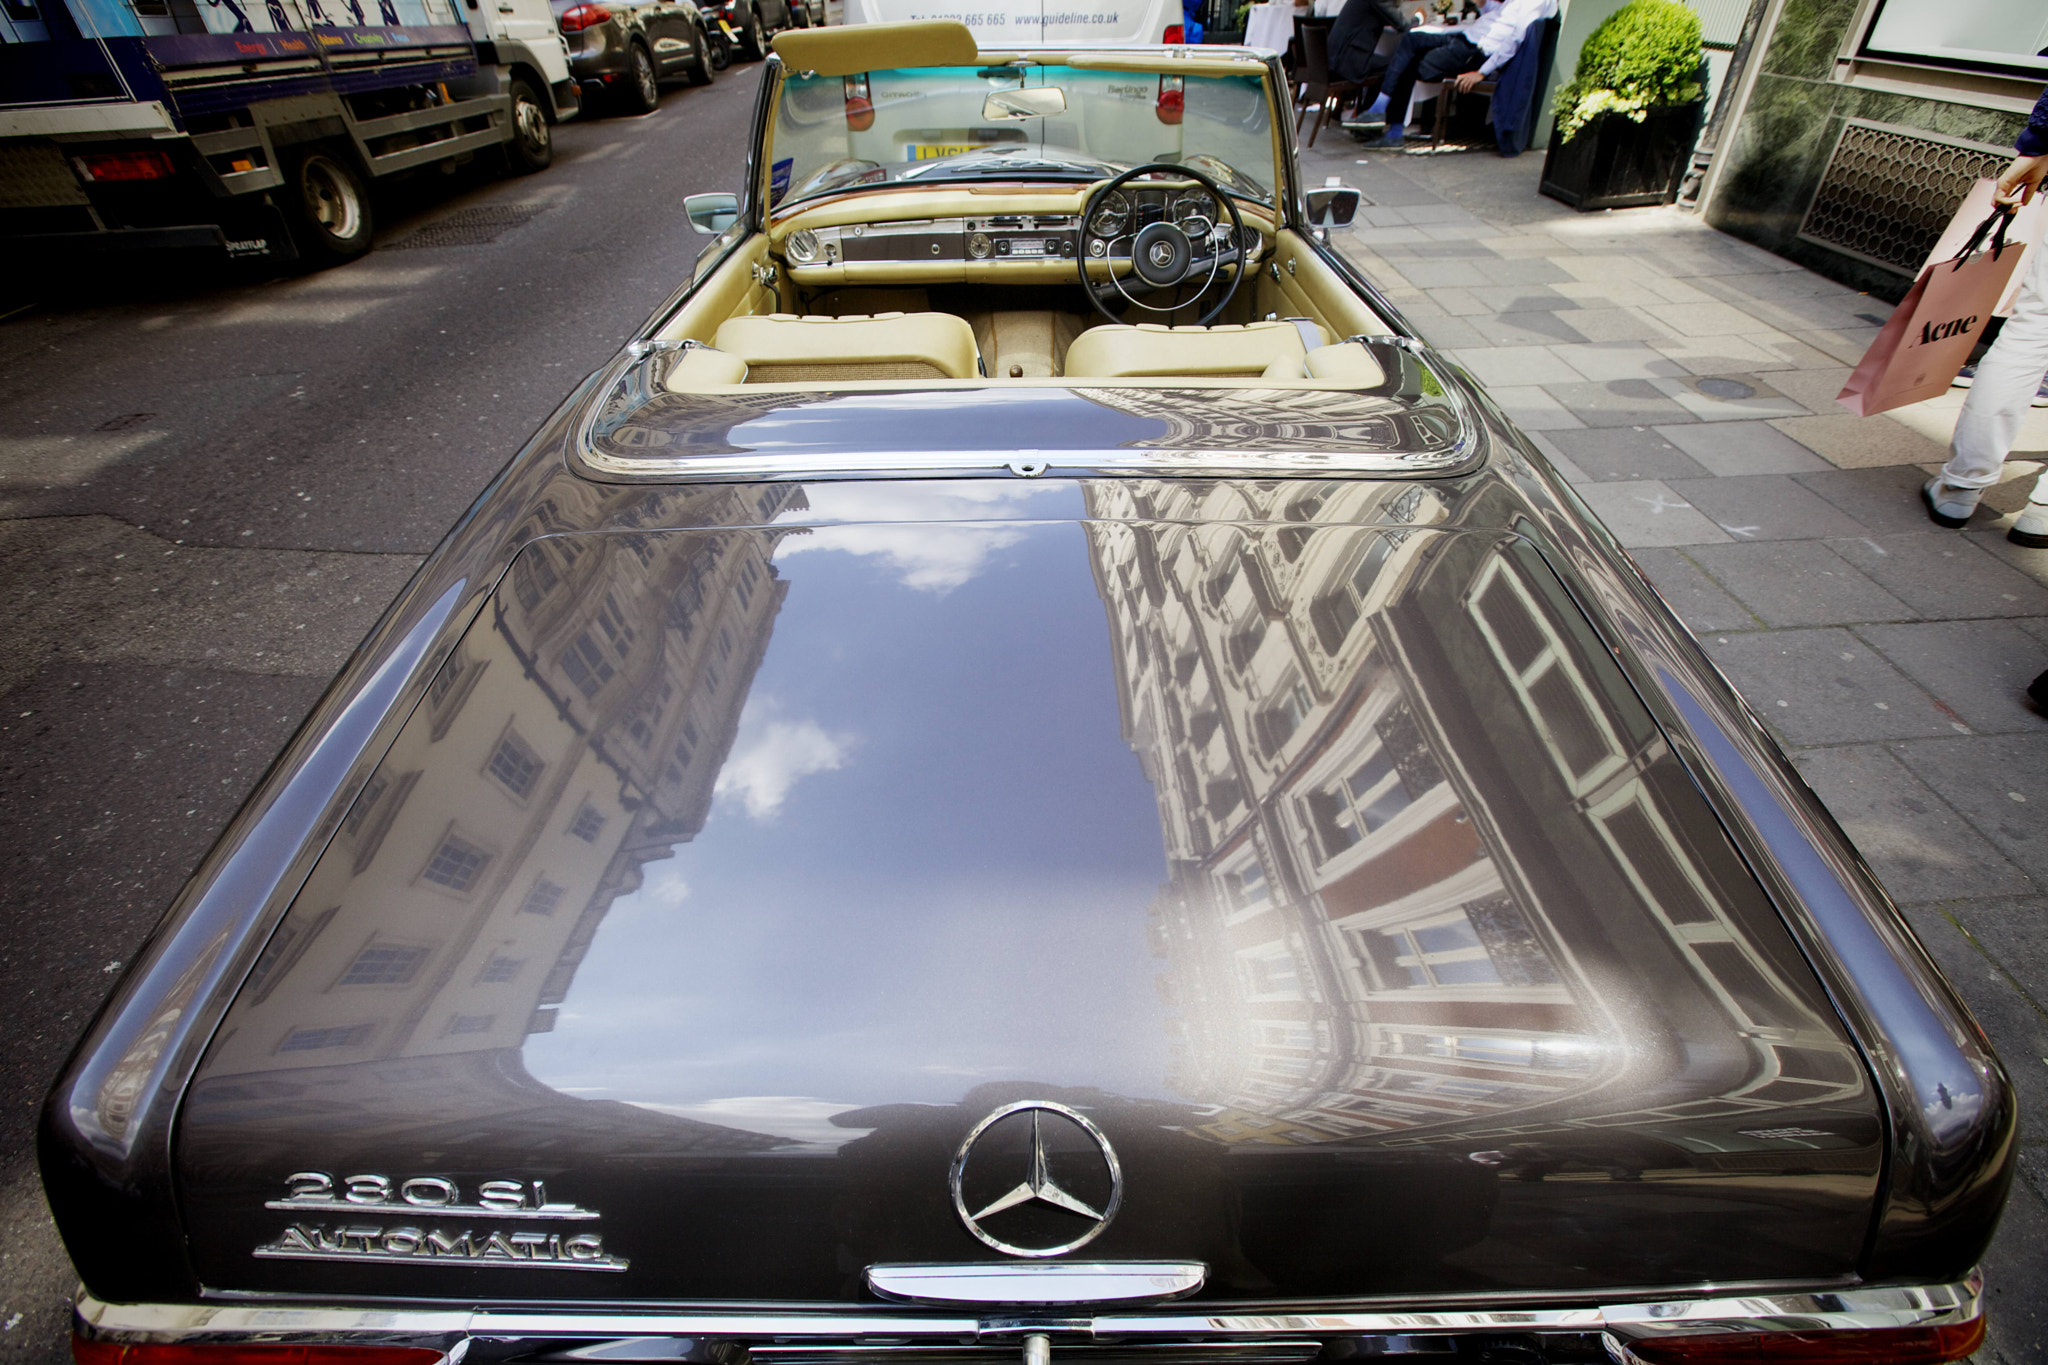 16.0 - 35.0 mm sample photo. Vintage mercedes-benz on the streets of london, uk photography